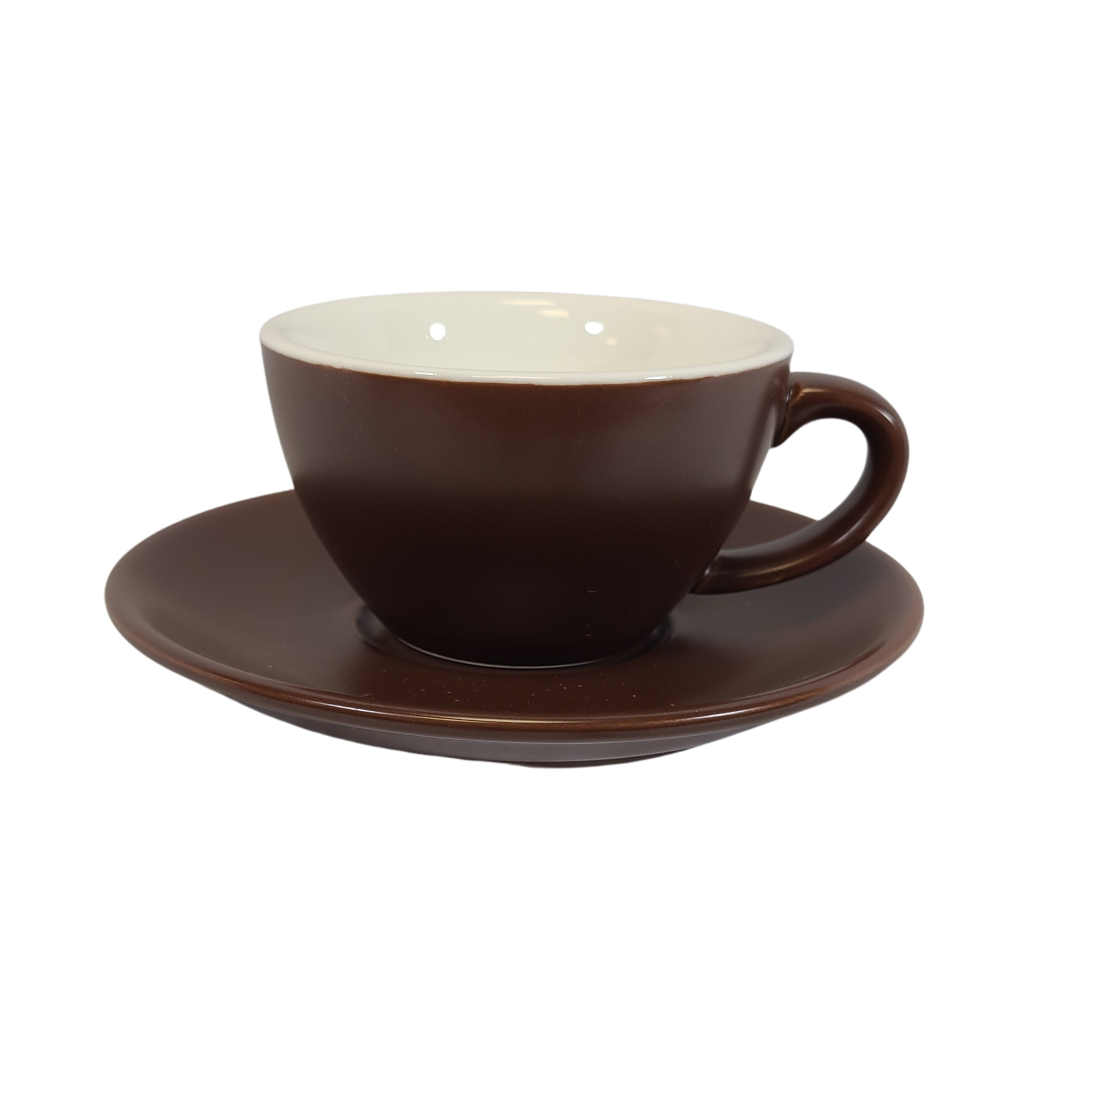 Coffee Addicts commercial ceramic cup with saucer in matte brown cappuccino cortado cup 5oz 150ml